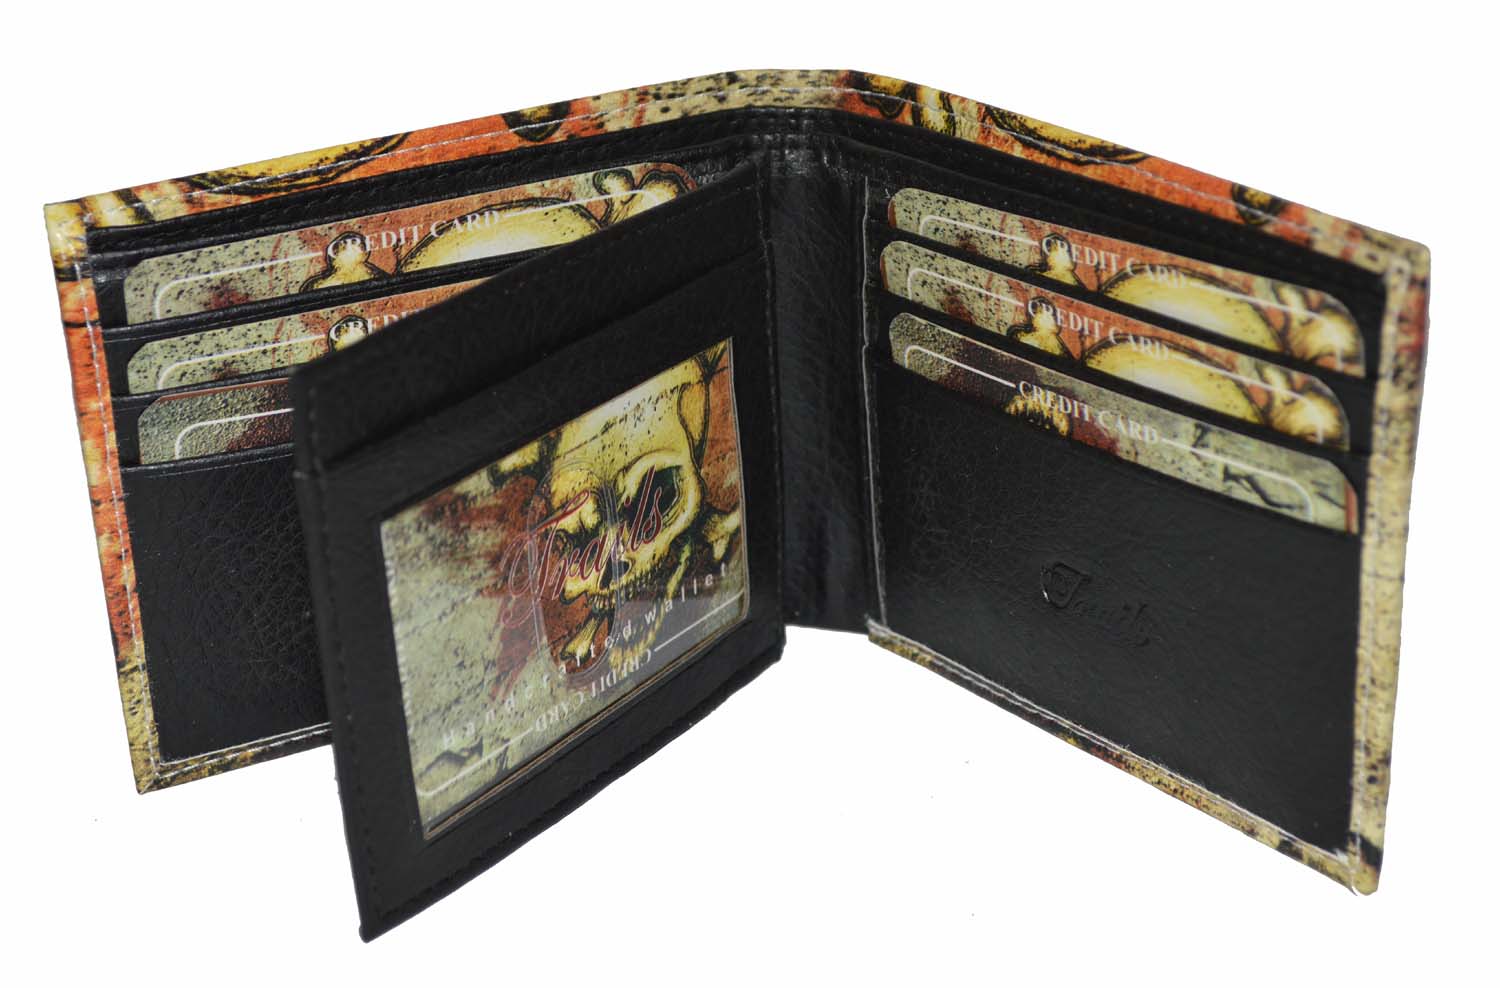 Leatherboss Mens Bifold Exotic Wallet Picture Skull with a printed gift box